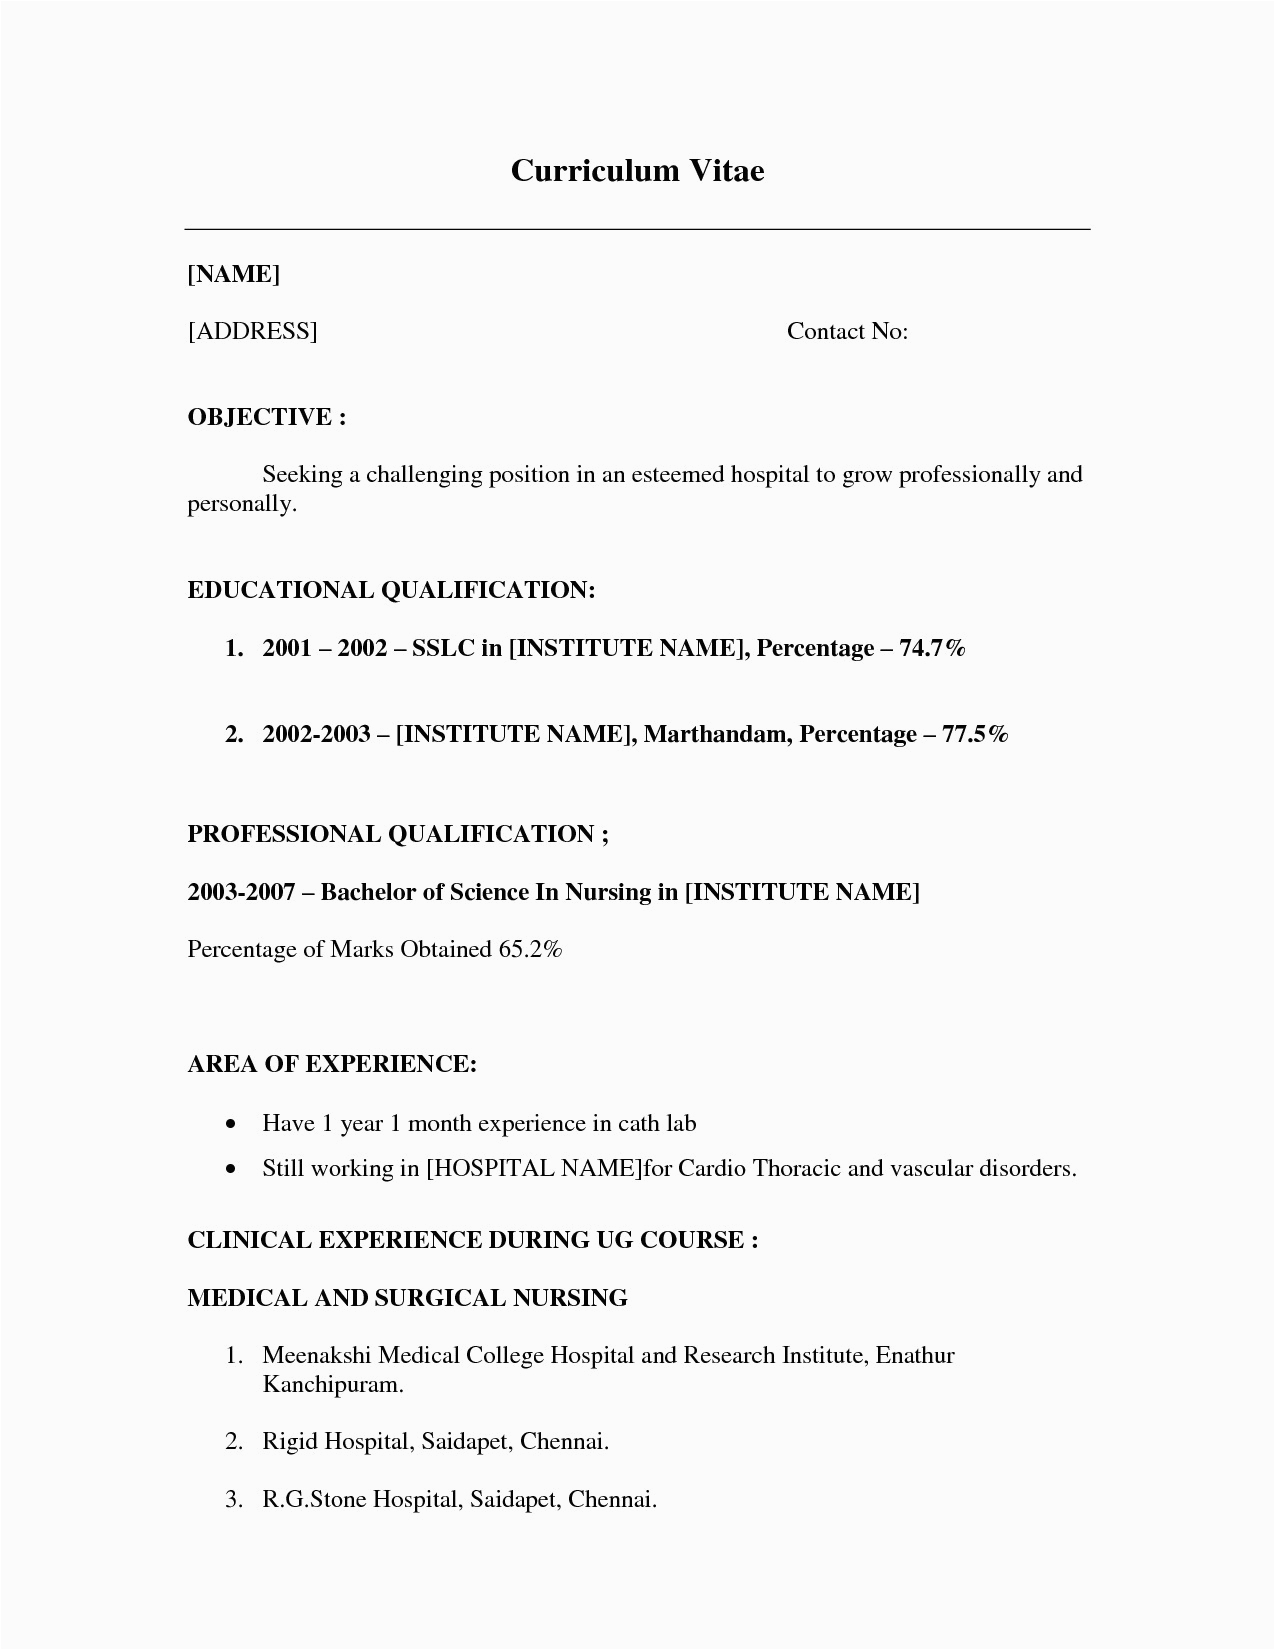 Resume Samples with Little Work Experience Resume Examples Little Work Experience Resume Templates